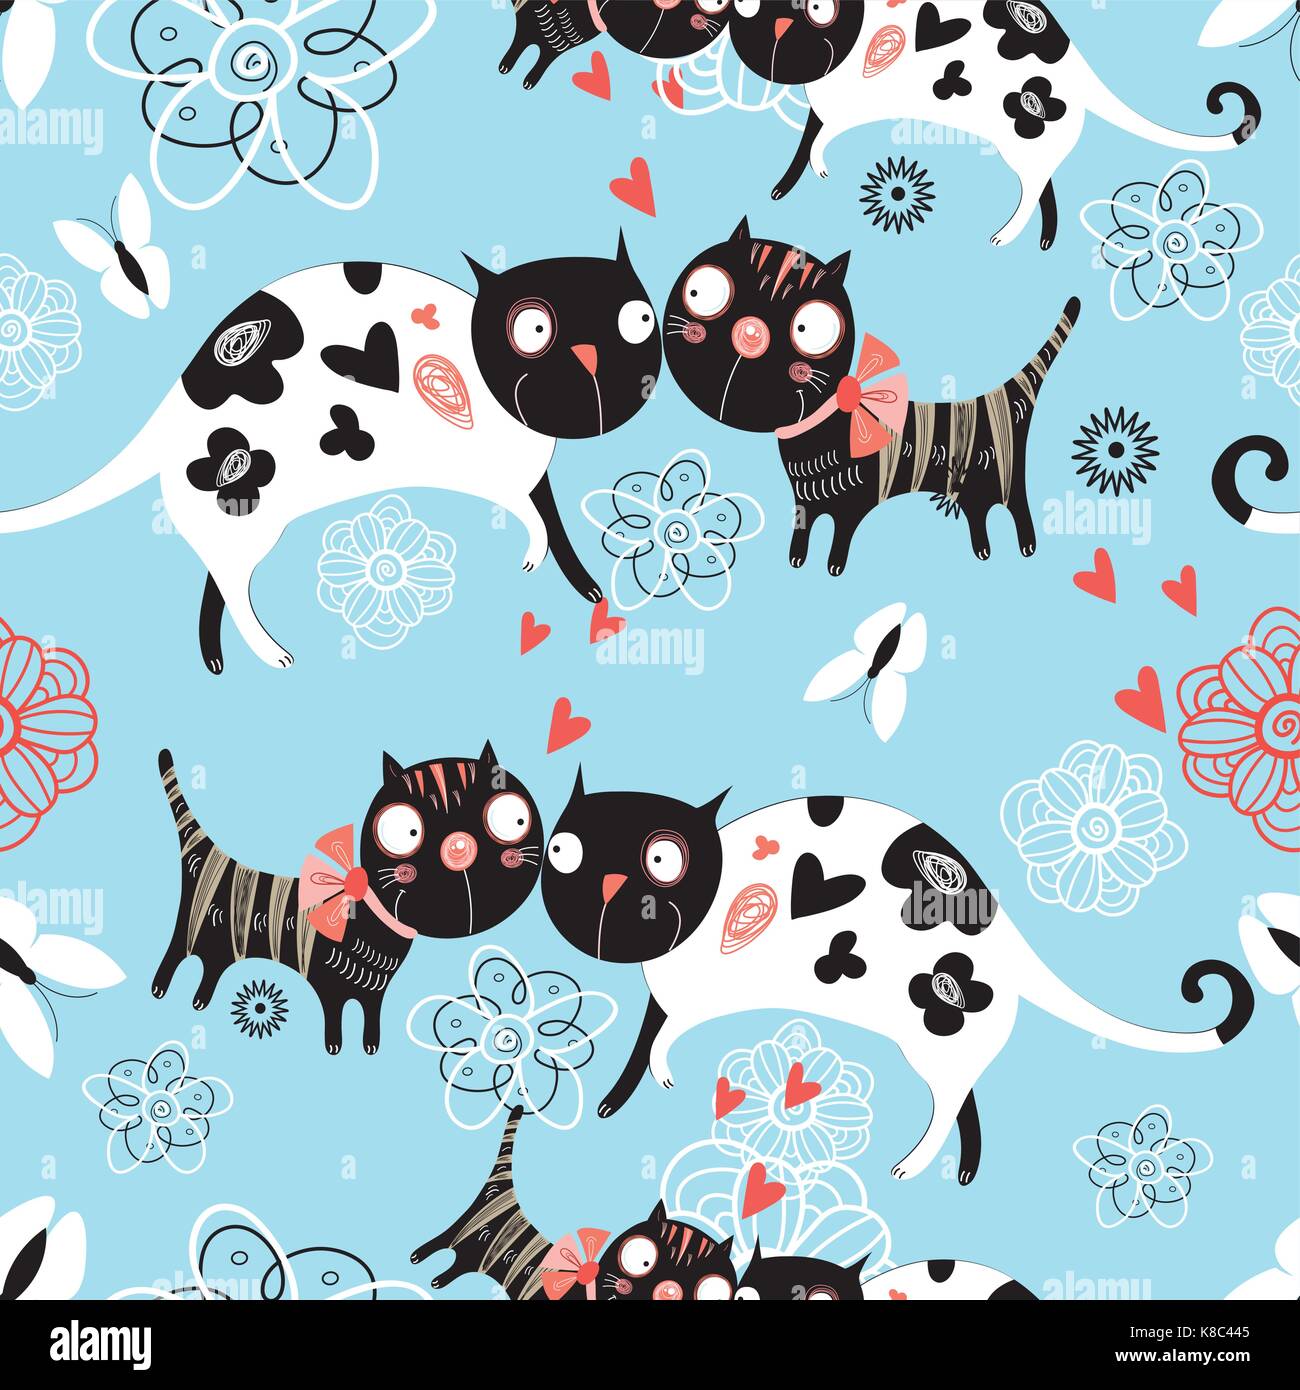 Seamless graphic pattern of enamored cats  Stock Vector